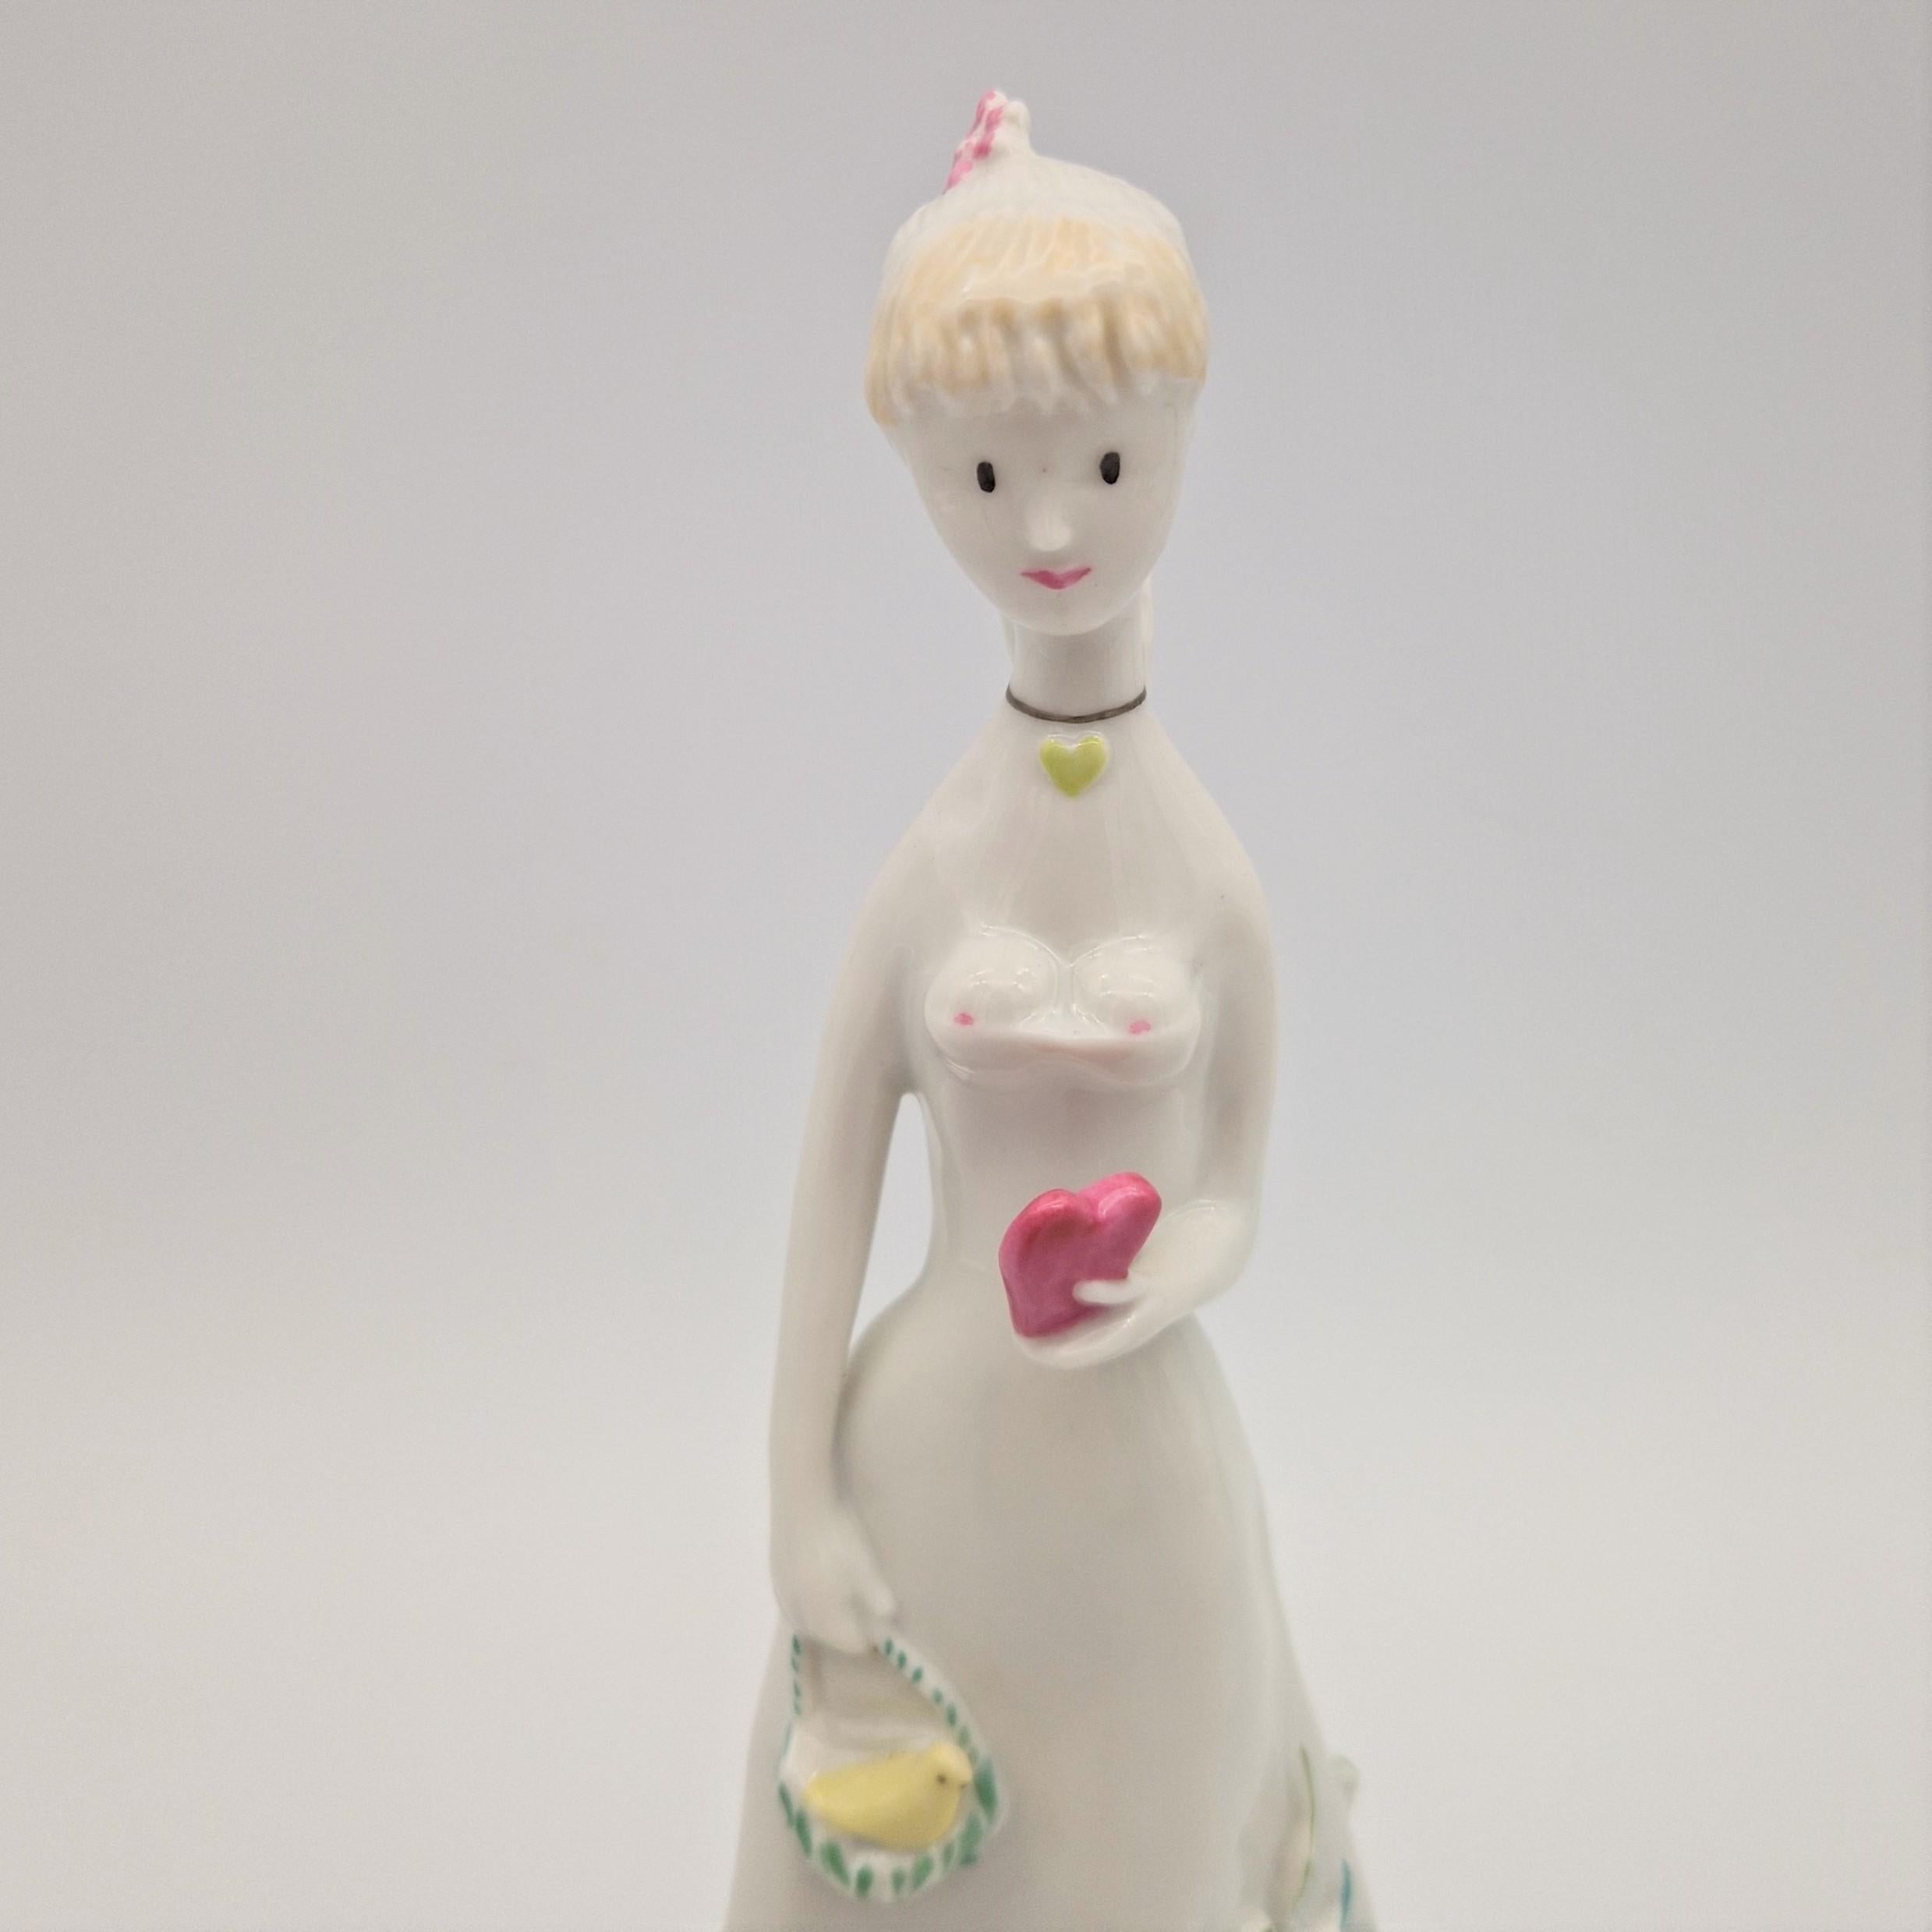 Porcelain figurine in great condition.